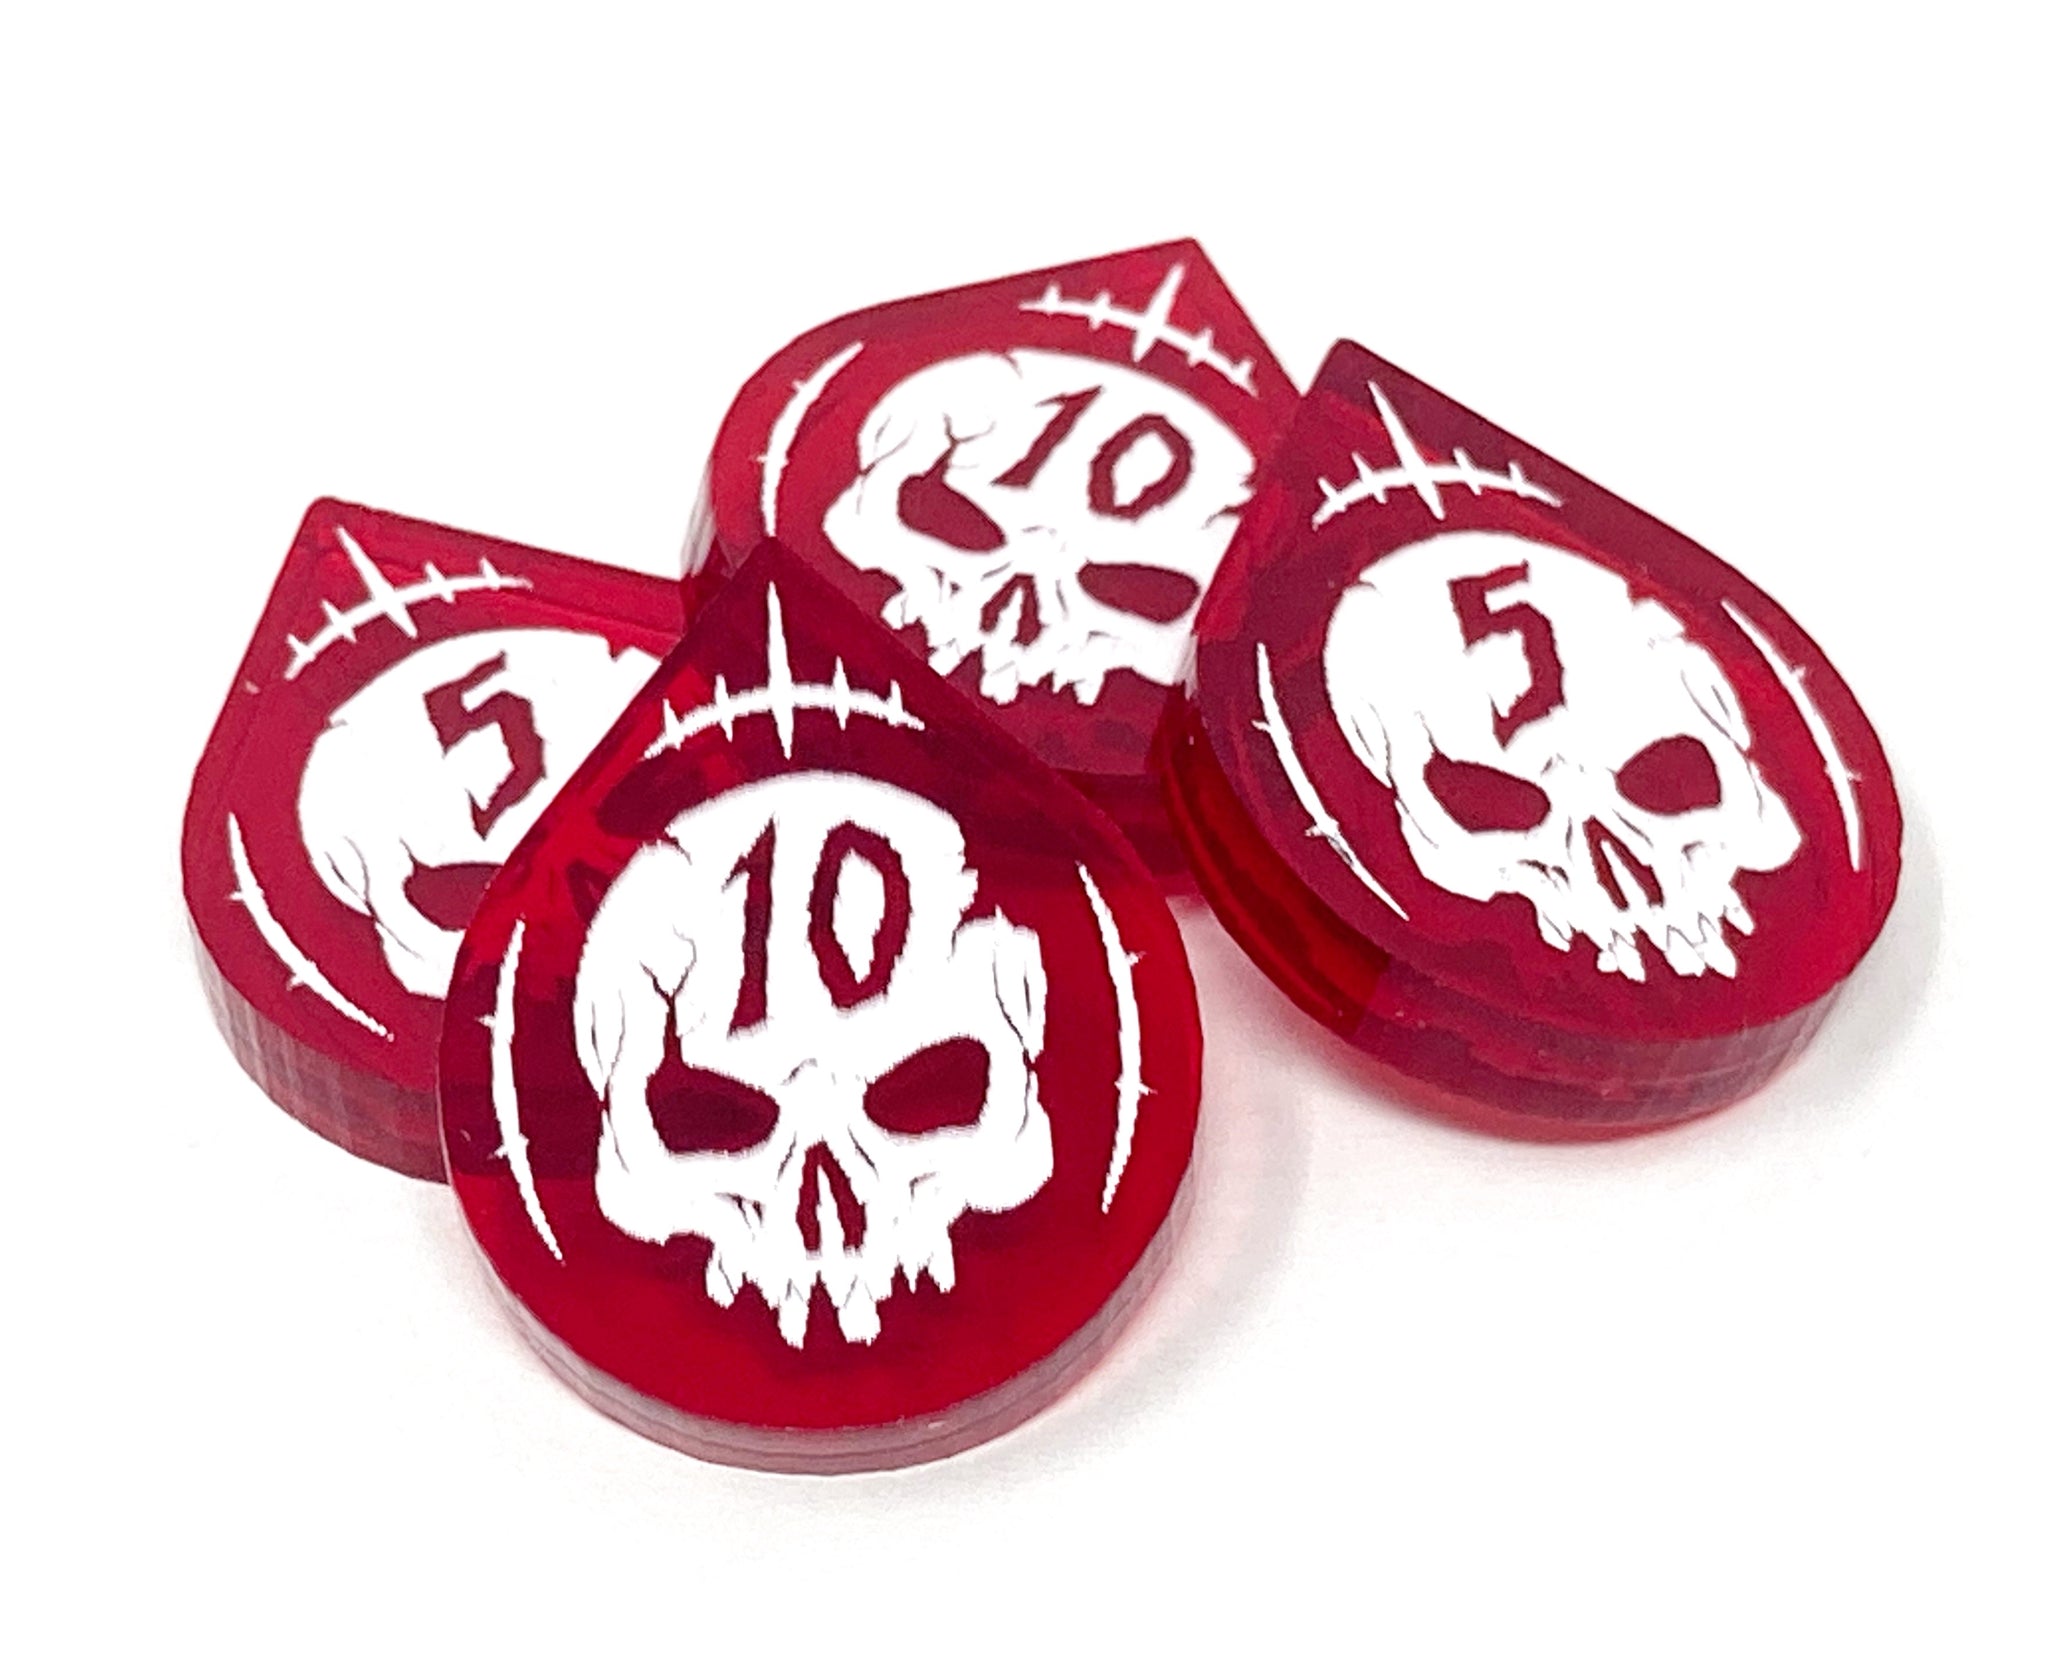 Two player Token set for Warcry